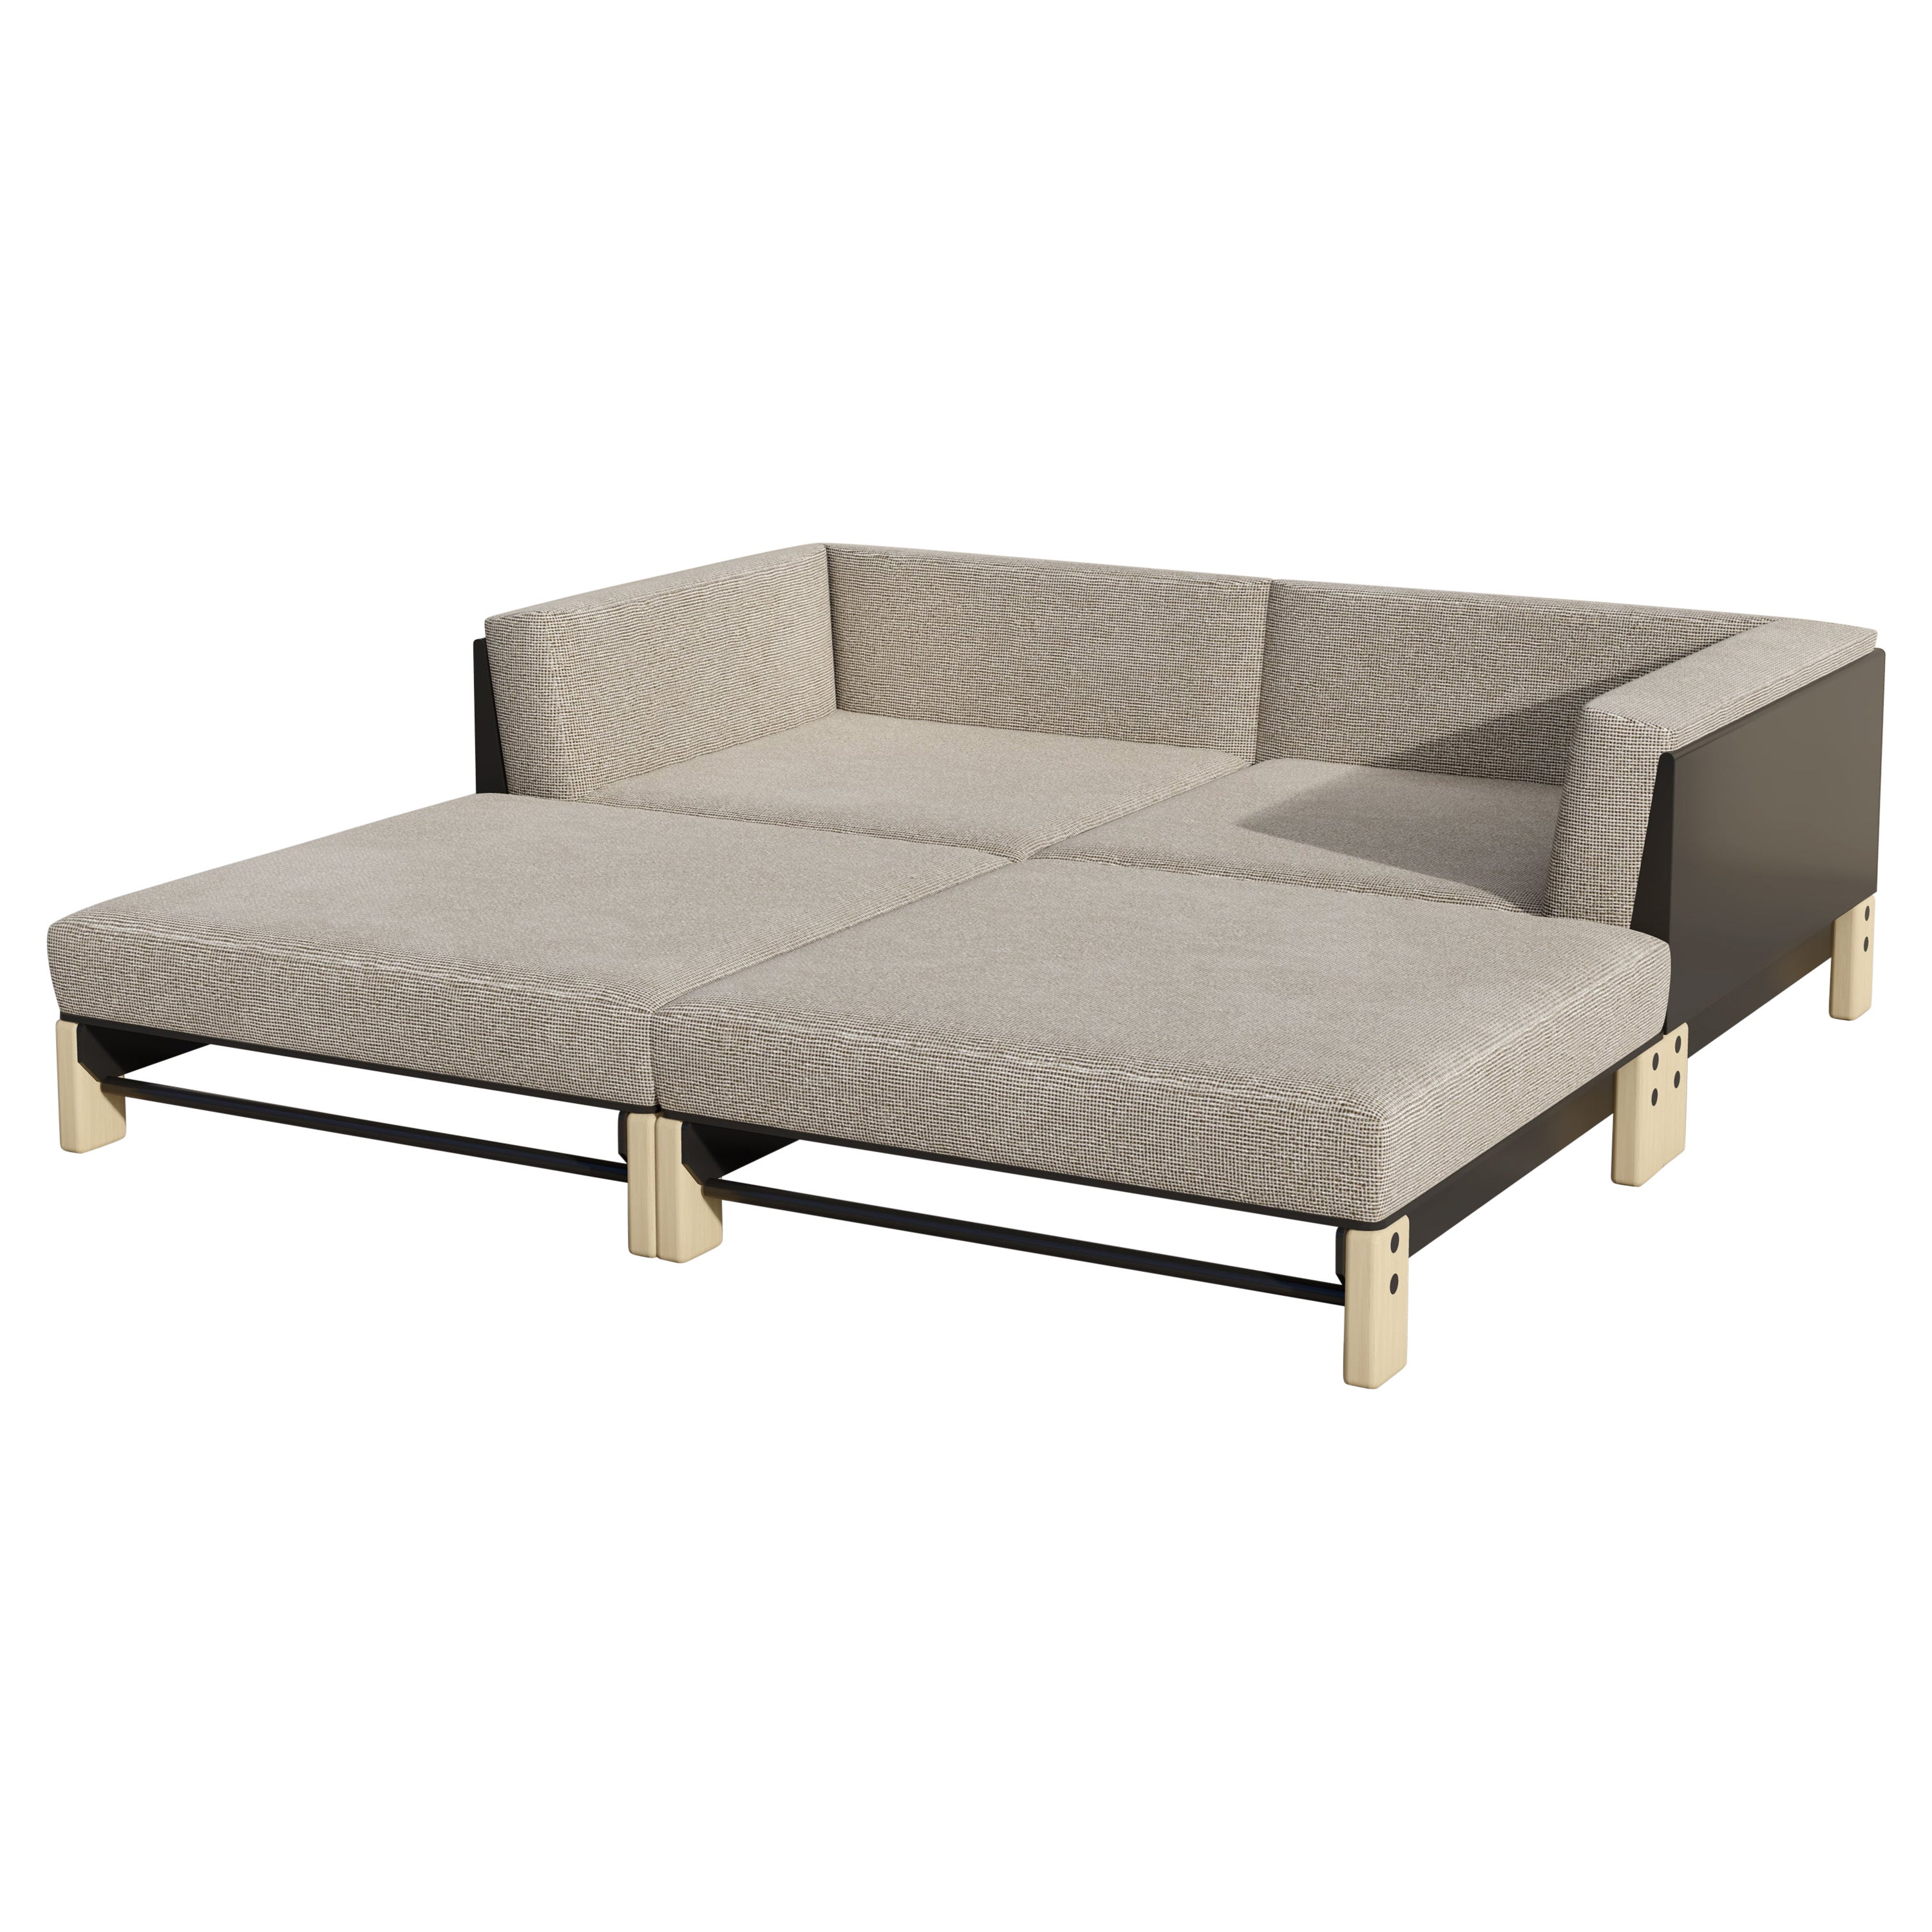 Outdoor-Loungesessel 0:1, Chaise Day Bed